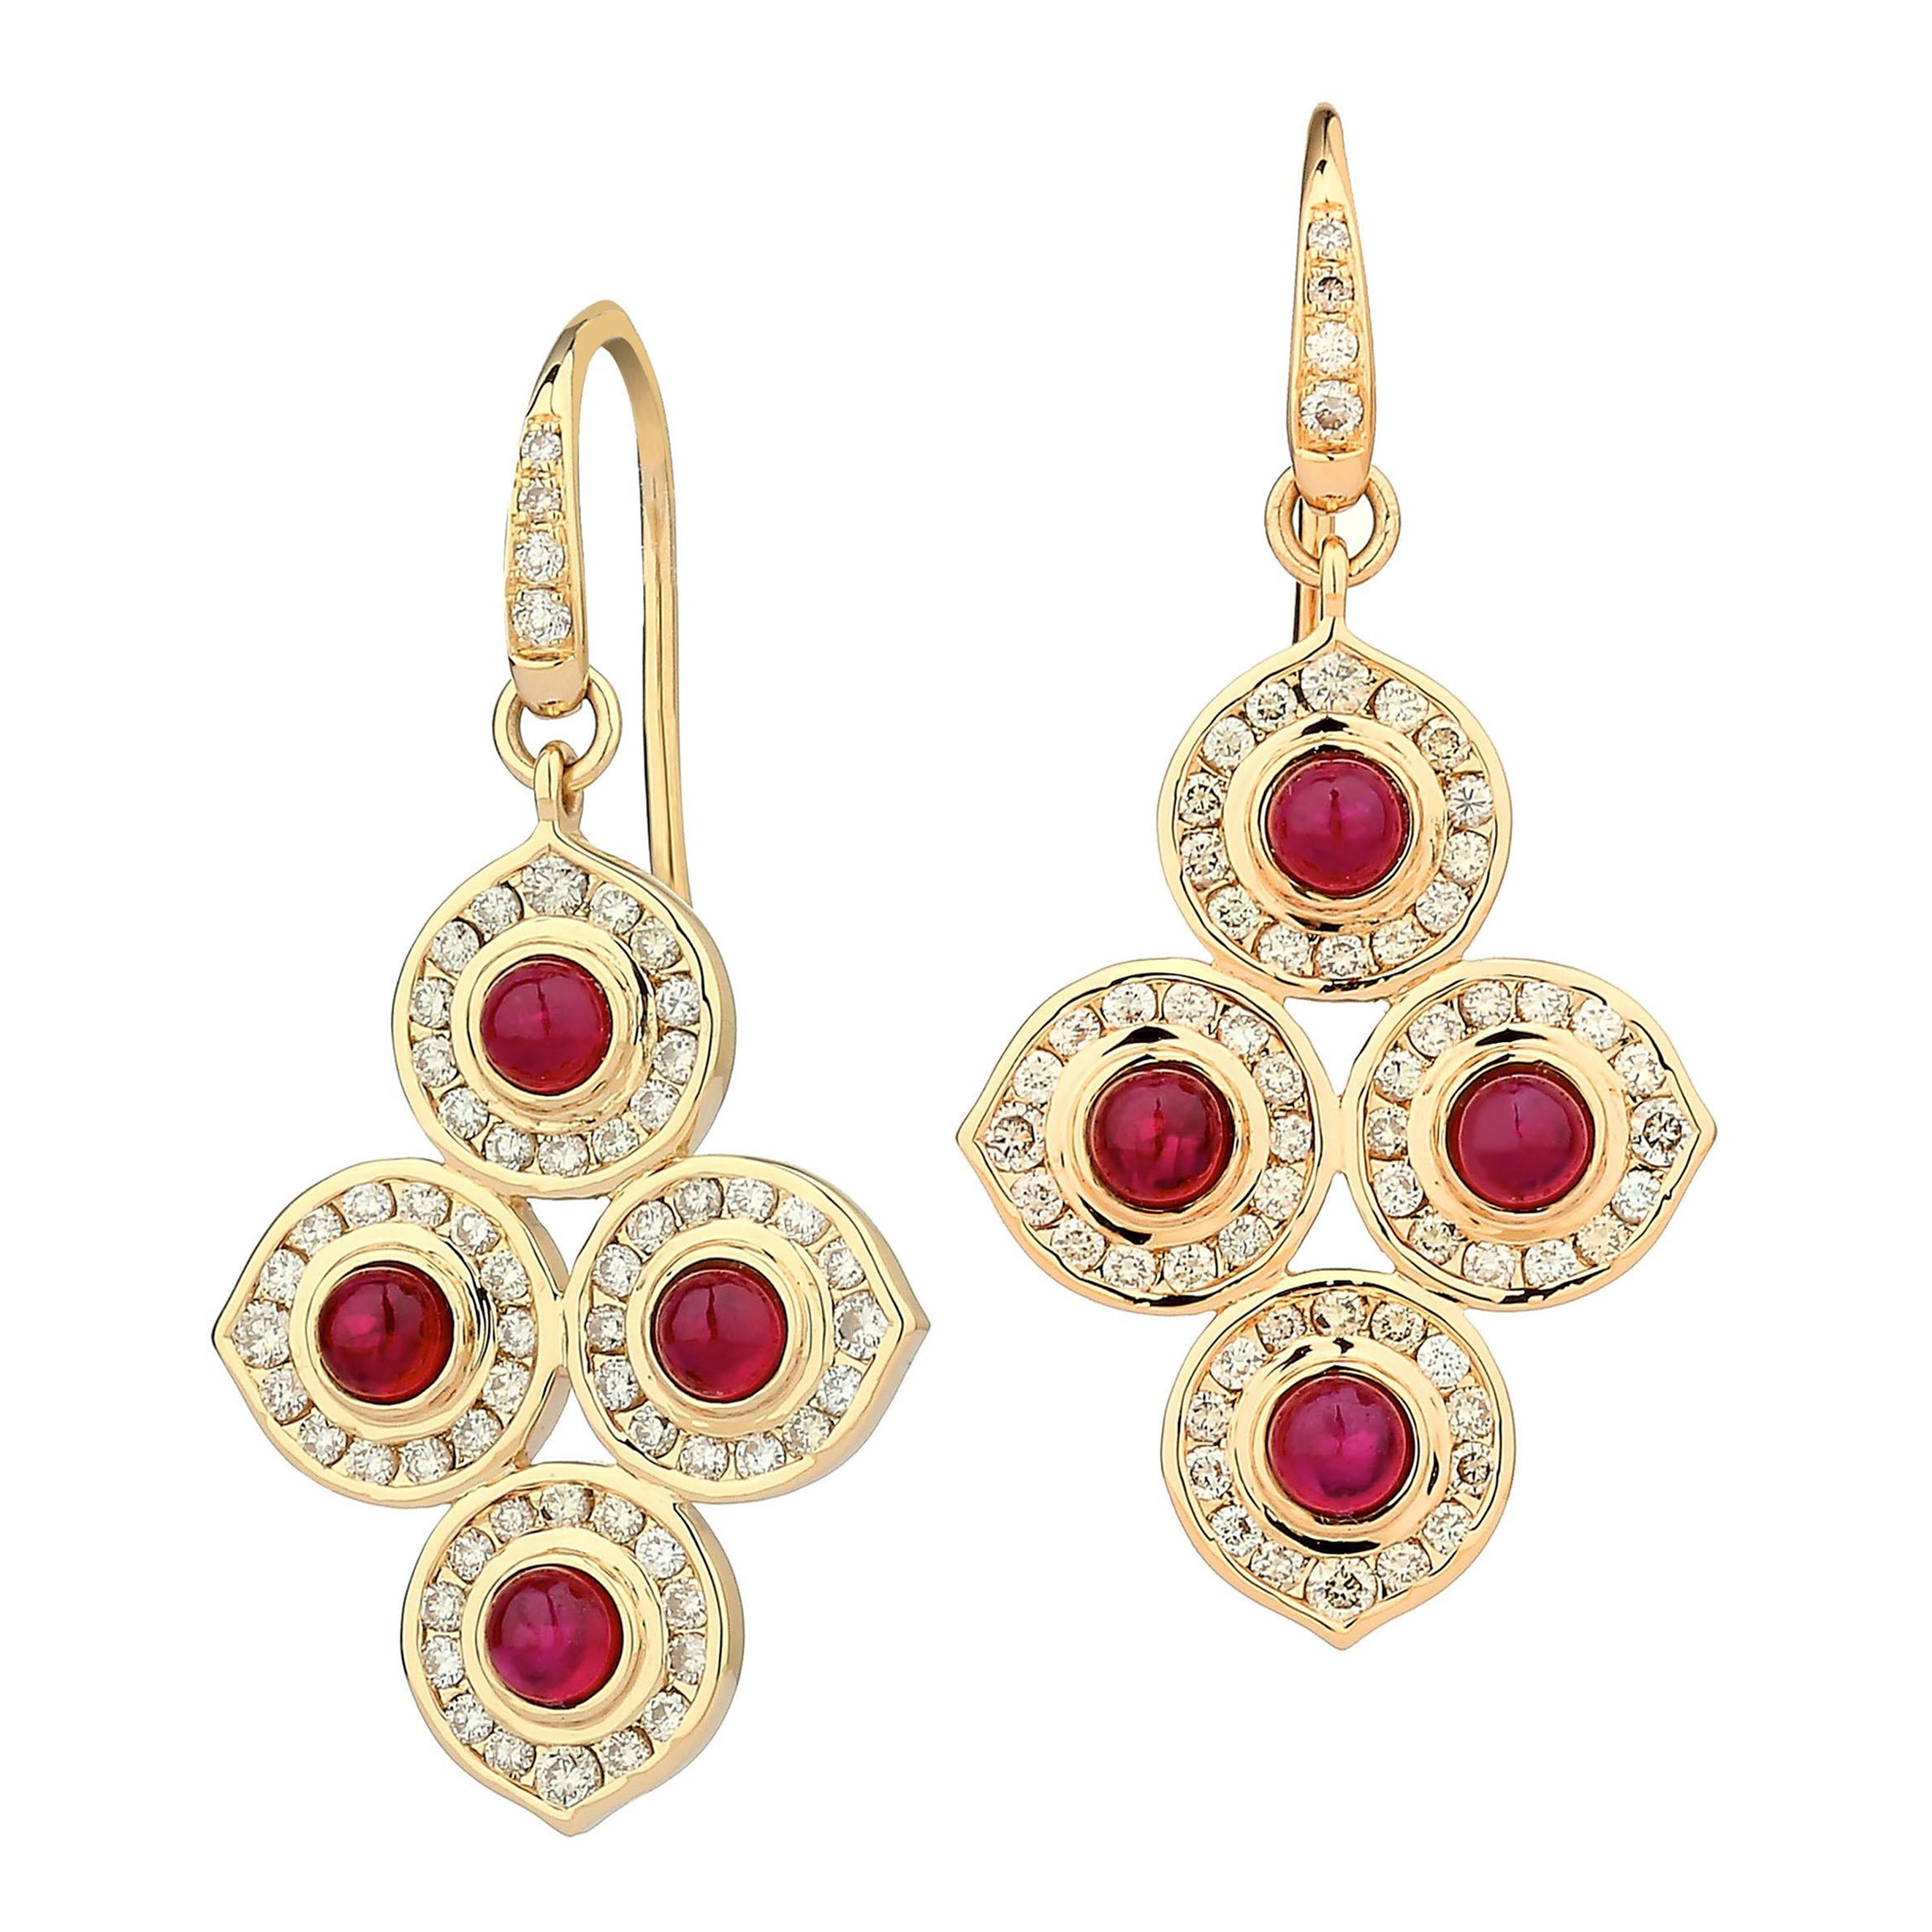 Syna Yellow Gold Earrings with Rubies and Diamonds